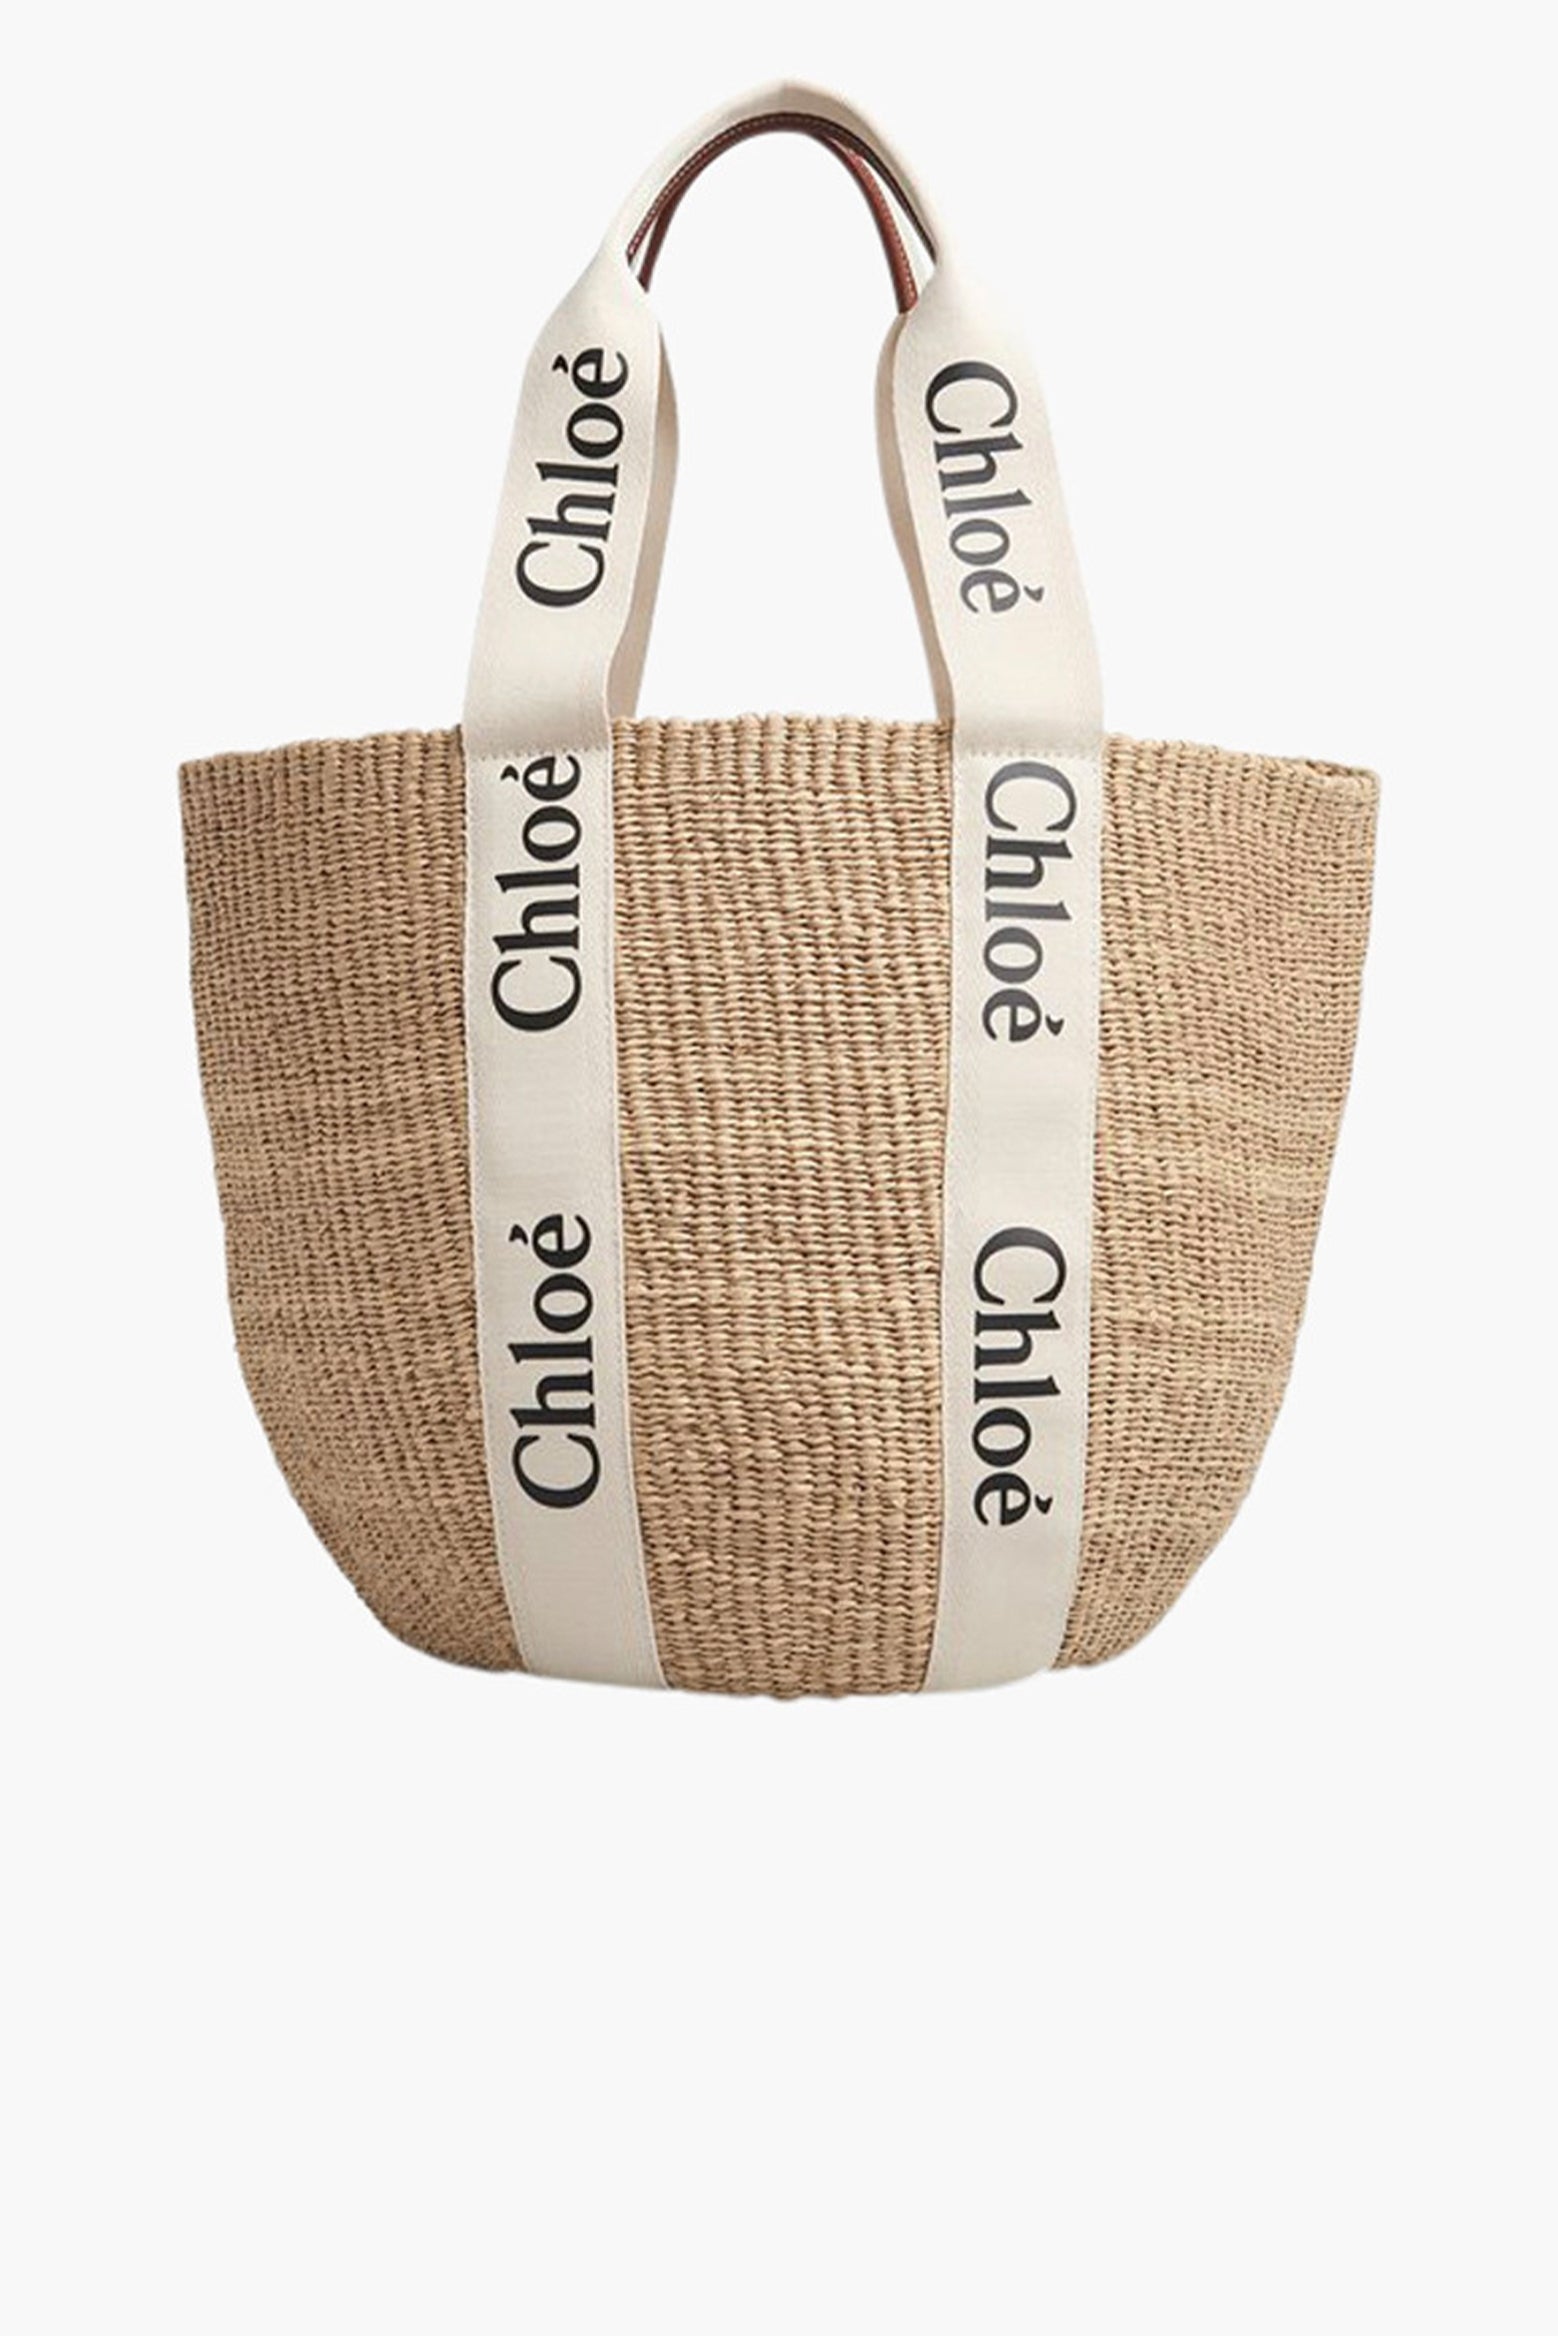 Chloé Woody Large Basket Bag in White available at The New Trend Australia.